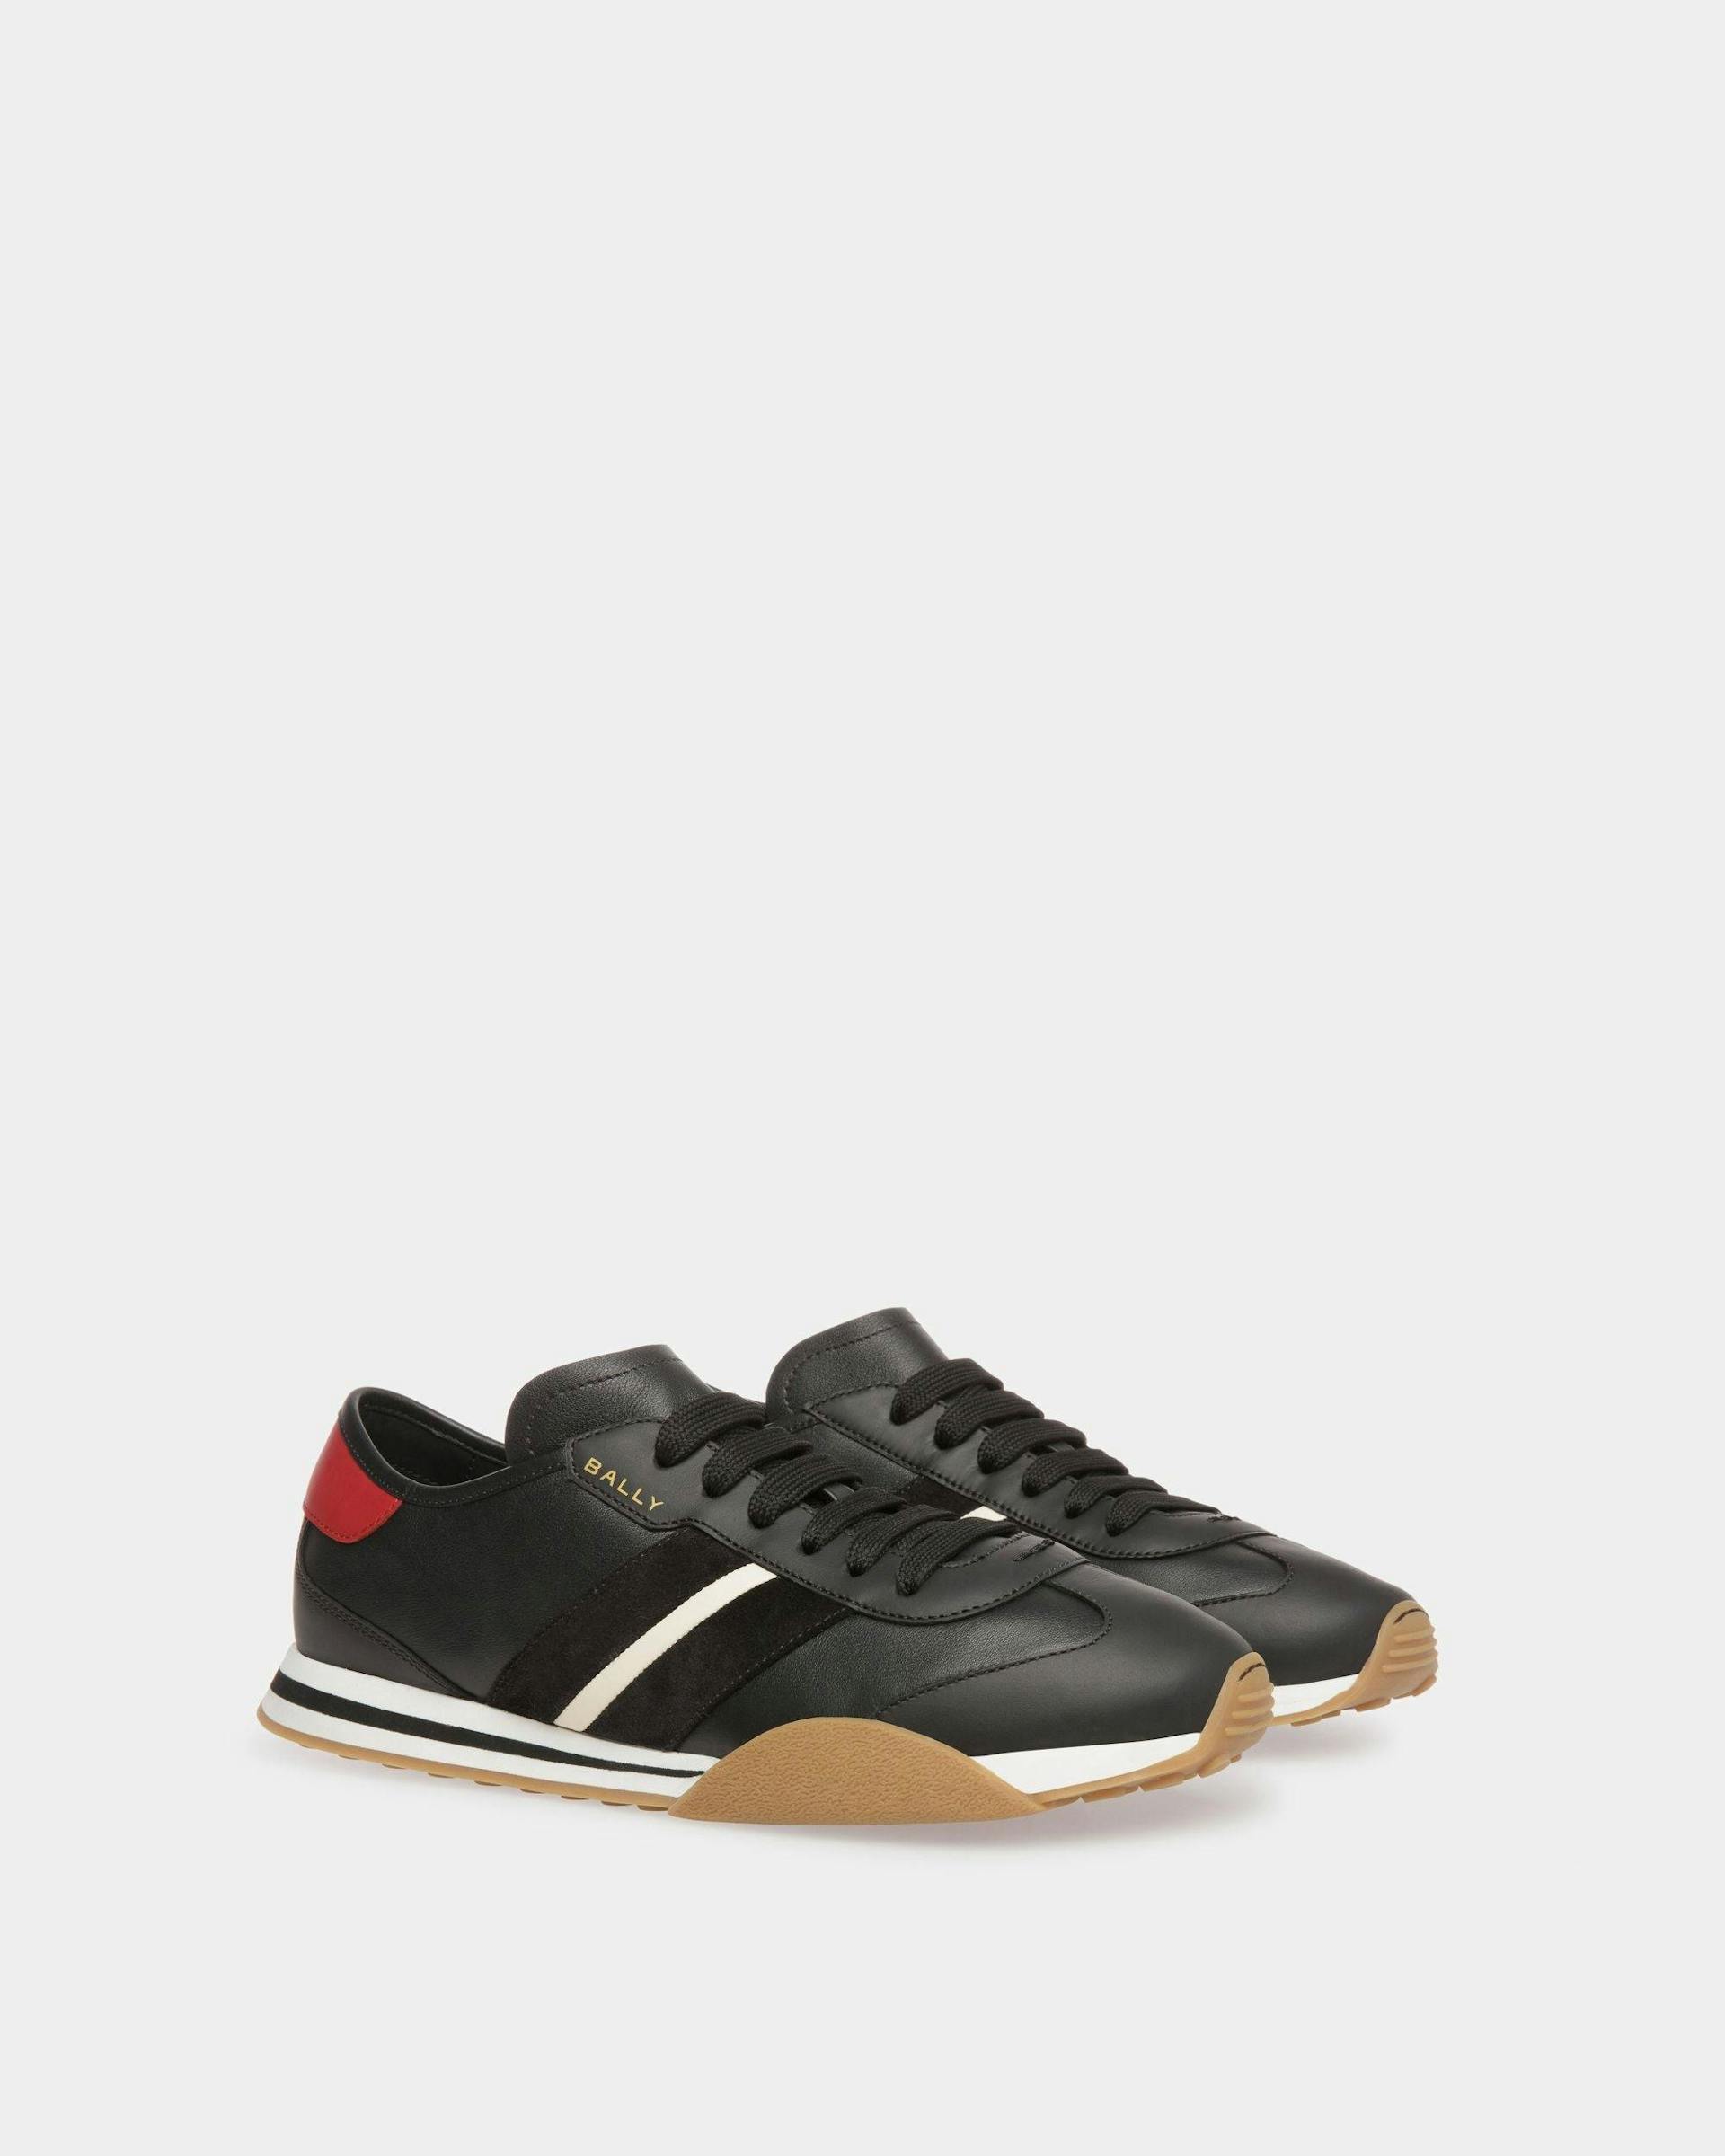 Men's Sussex Sneakers In Black, Bone And Deep Ruby Leather | Bally | Still Life 3/4 Front